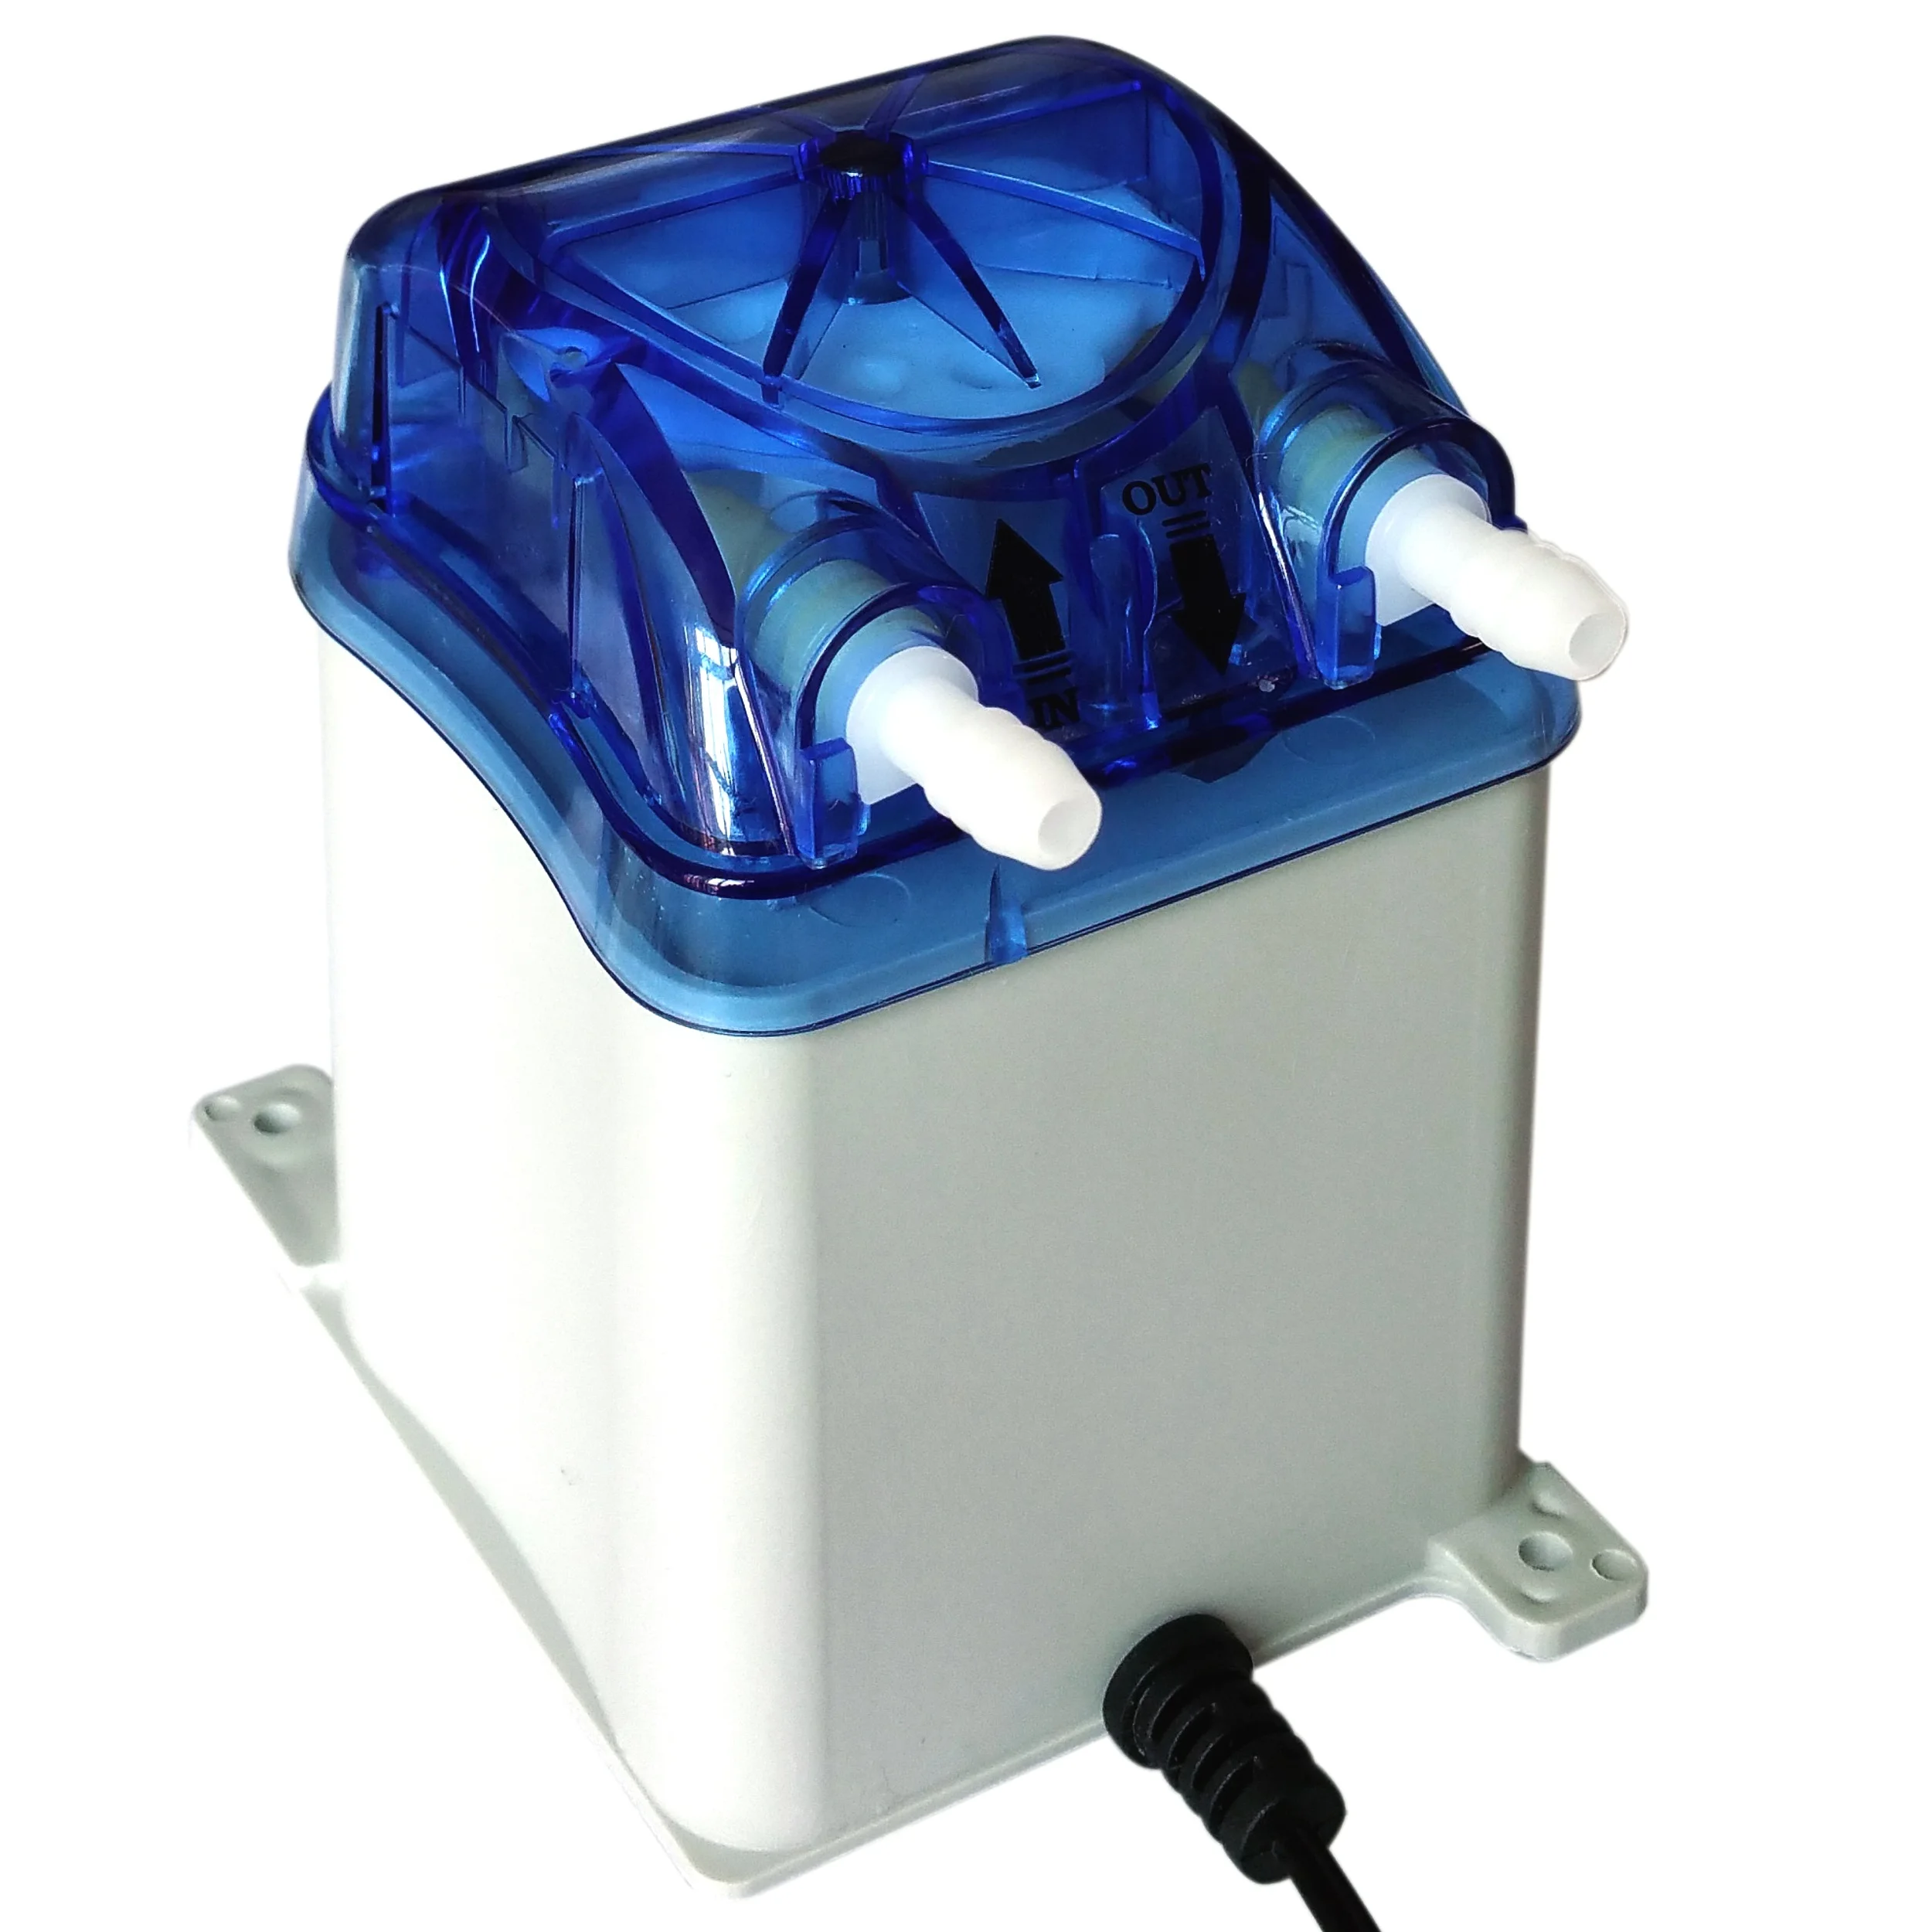 

1000ml/min, 2 rollers, Honlite 24V Peristaltic Pump with Exchangeable Pump Head and PharMed BPT peristaltic tube